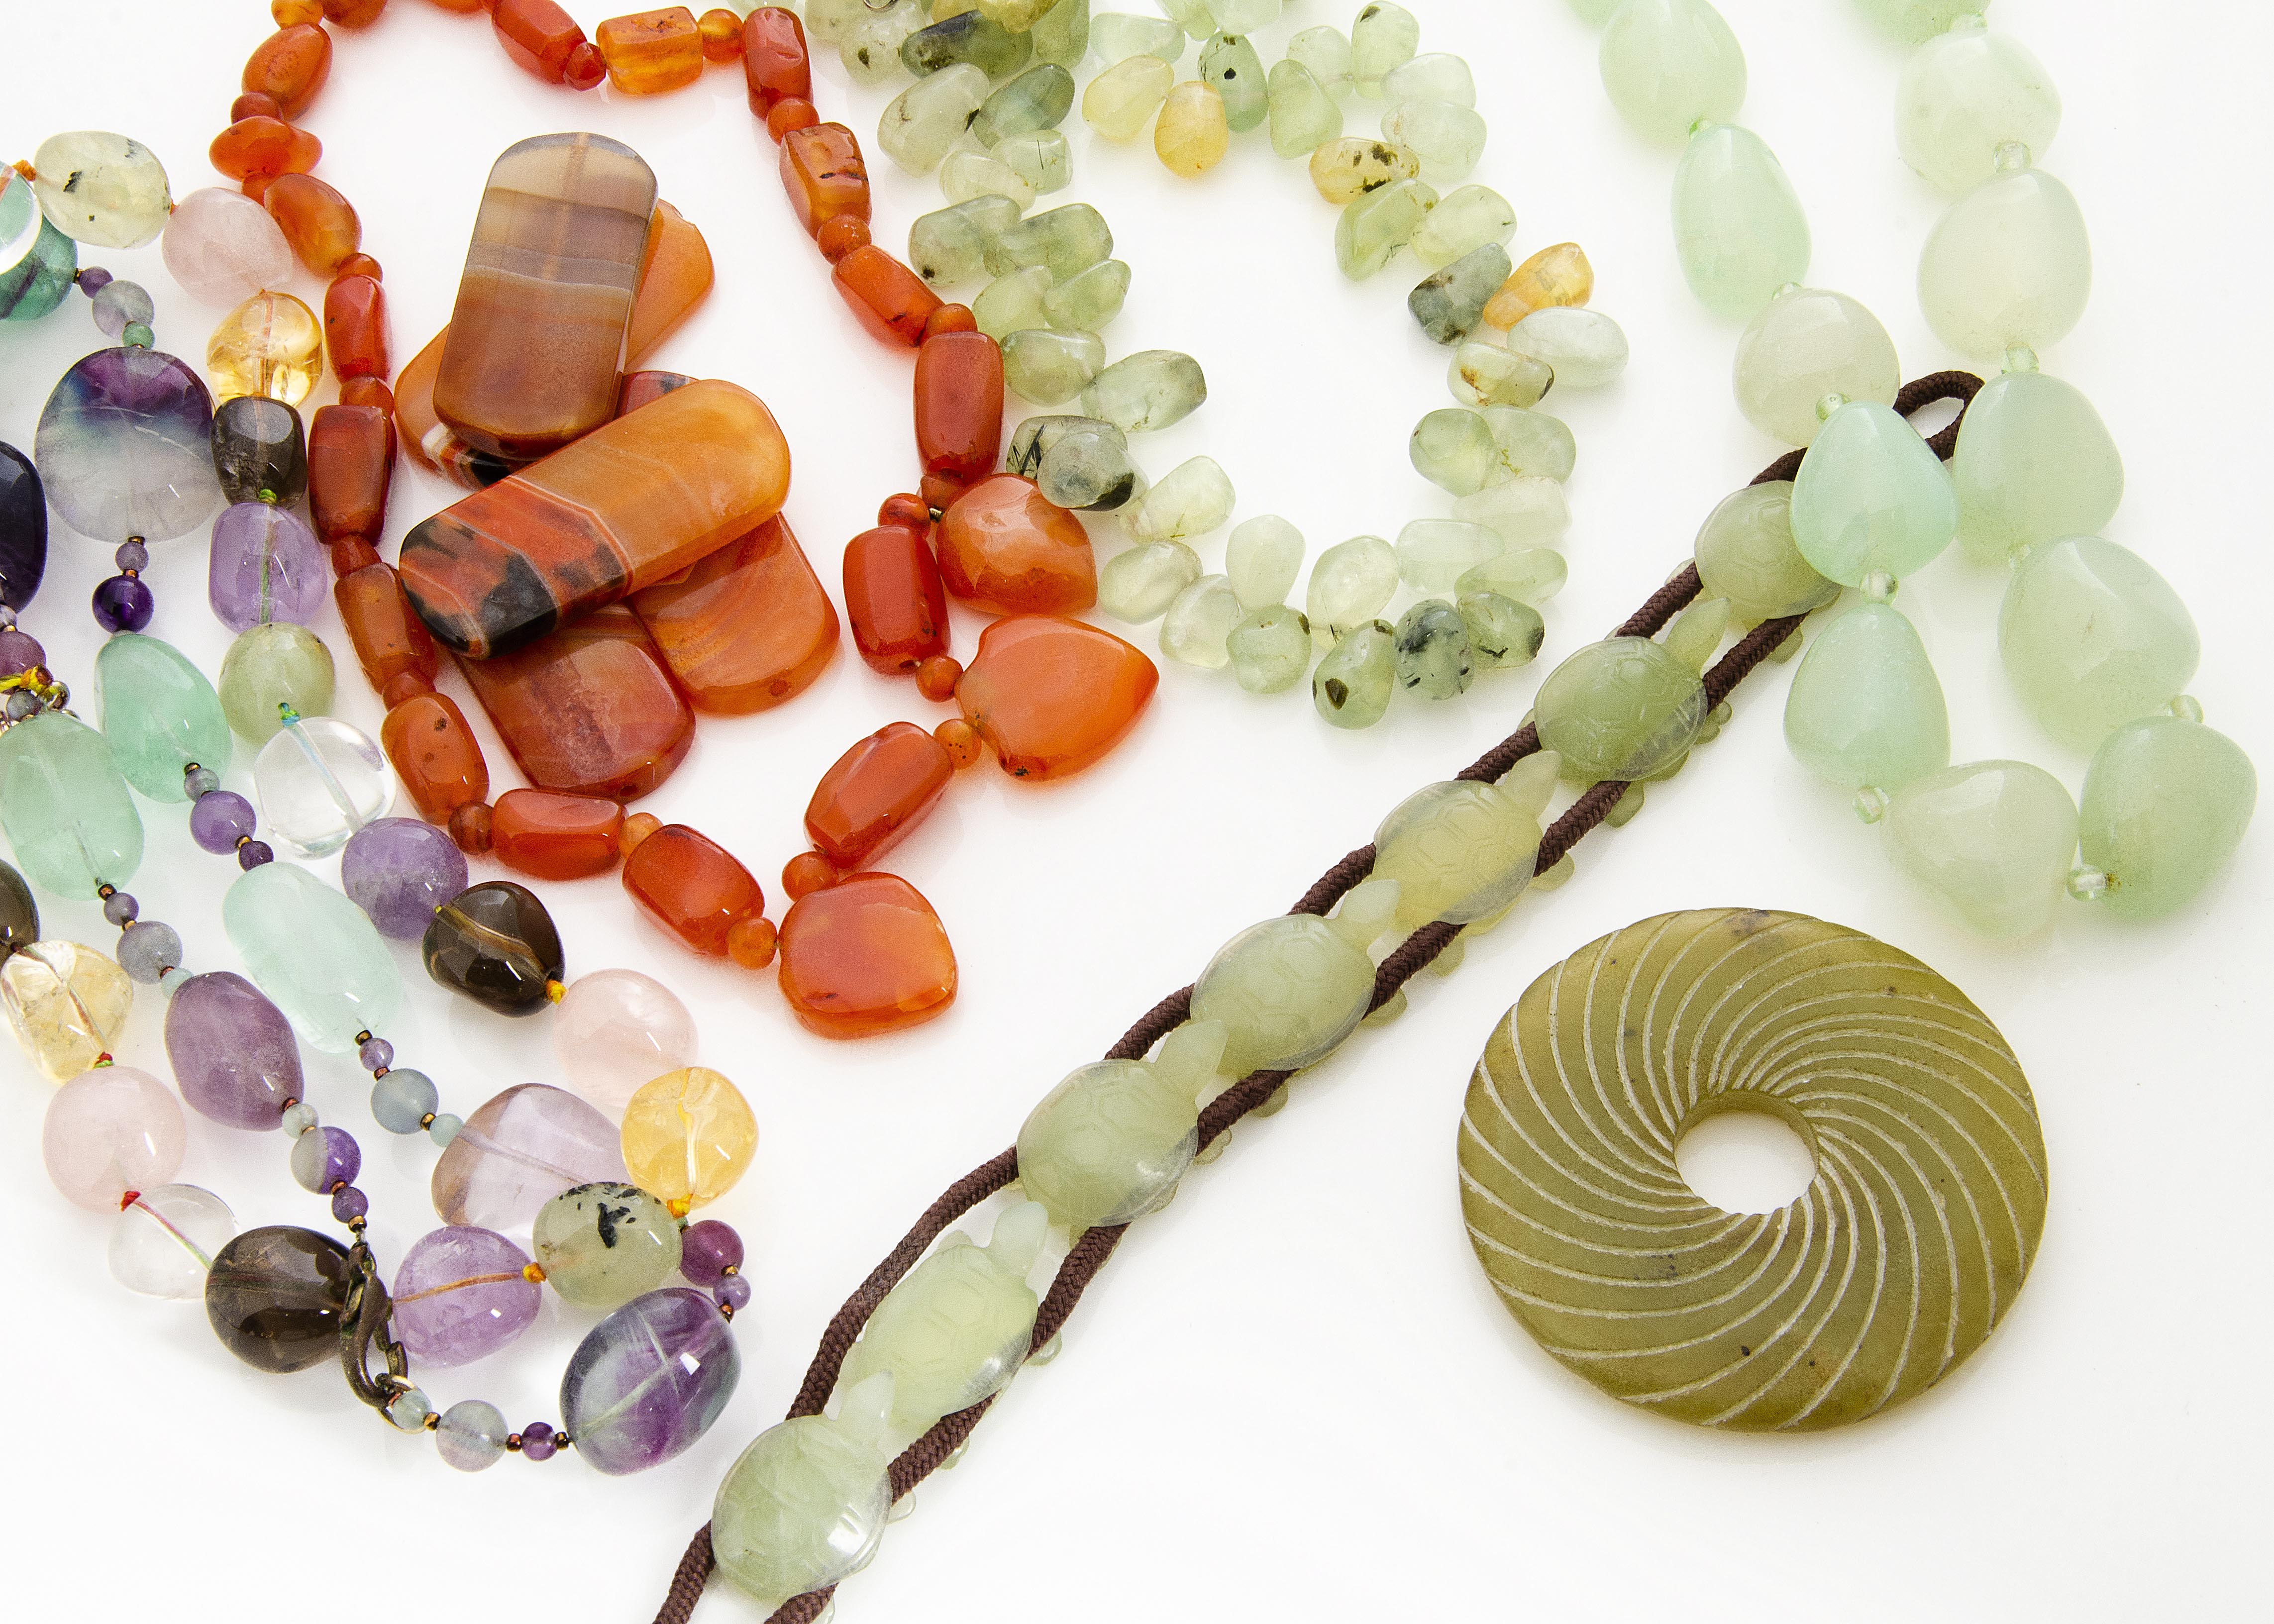 A large collection of rock crystal, amethyst, citrine and hardstone necklaces, pendants and beads, - Image 2 of 2